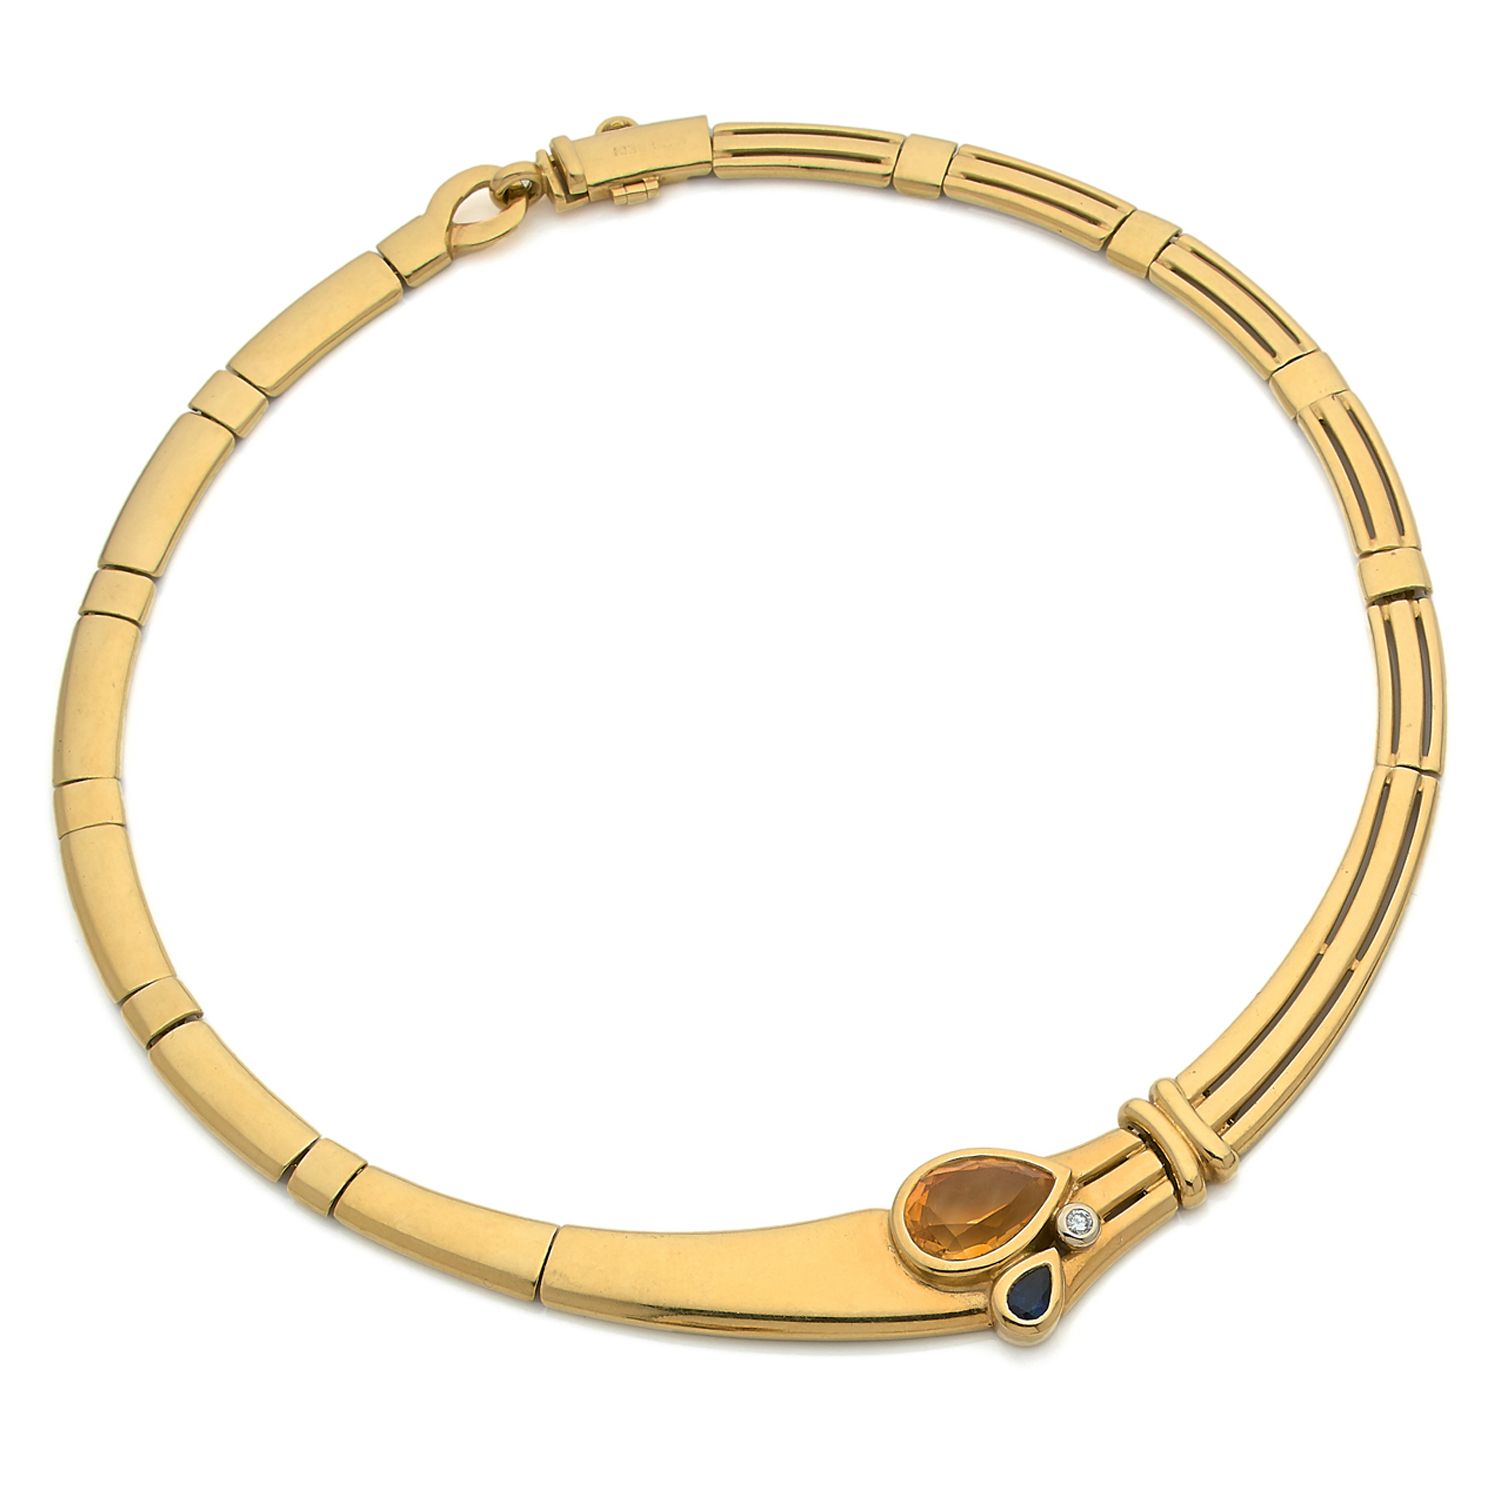 Null MANFREDI

1980s

Articulated necklace in 18K yellow gold adorned in

the ce&hellip;